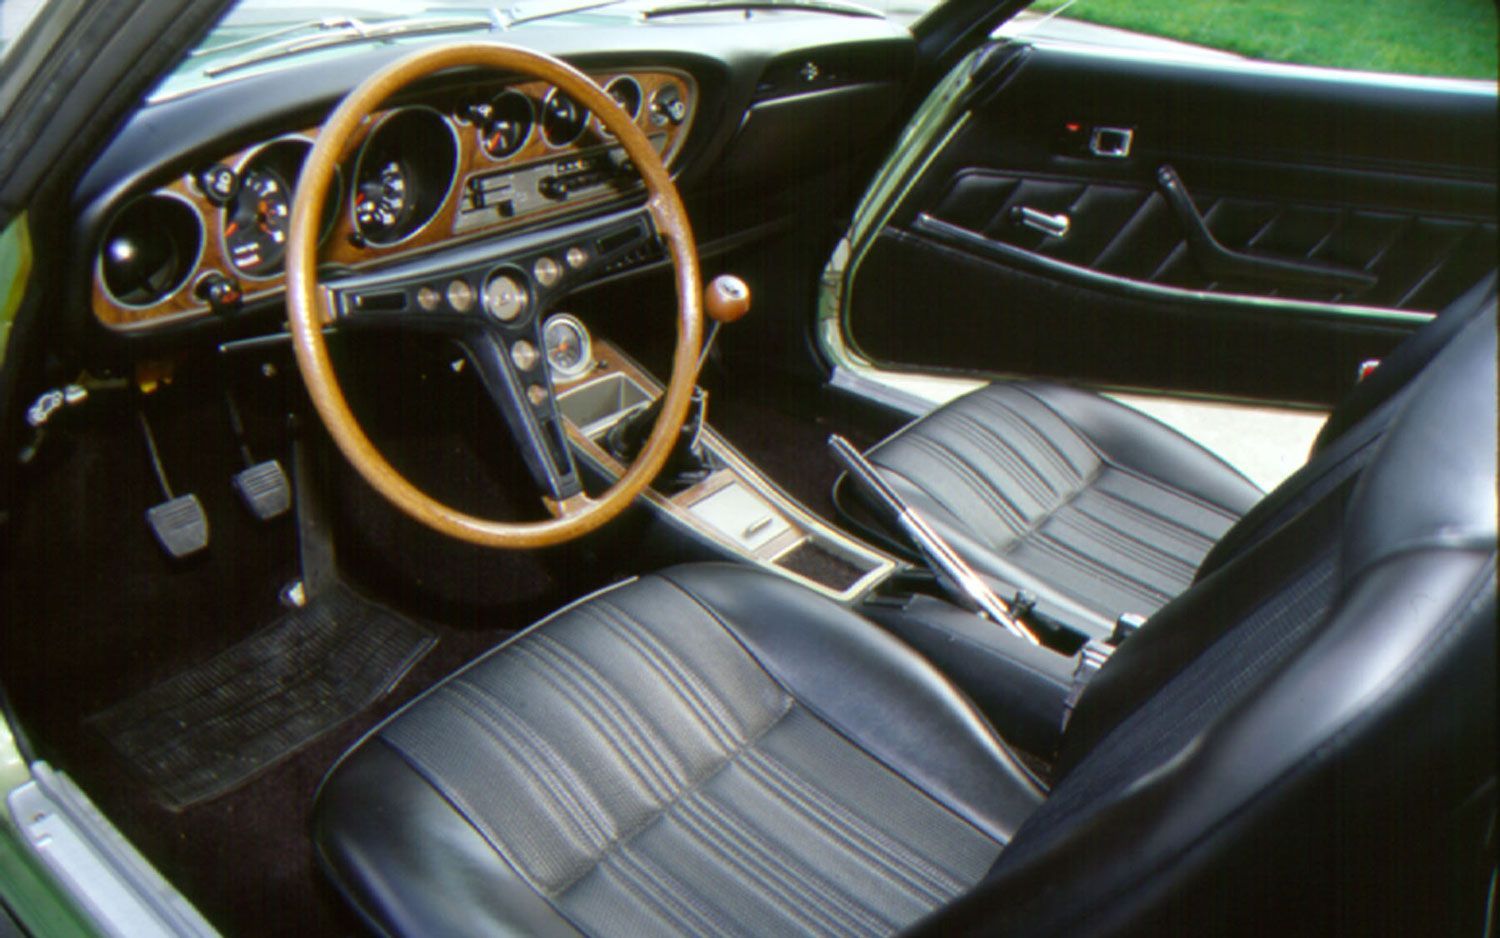 An Image Of 1971 Toyota Celica's Interior